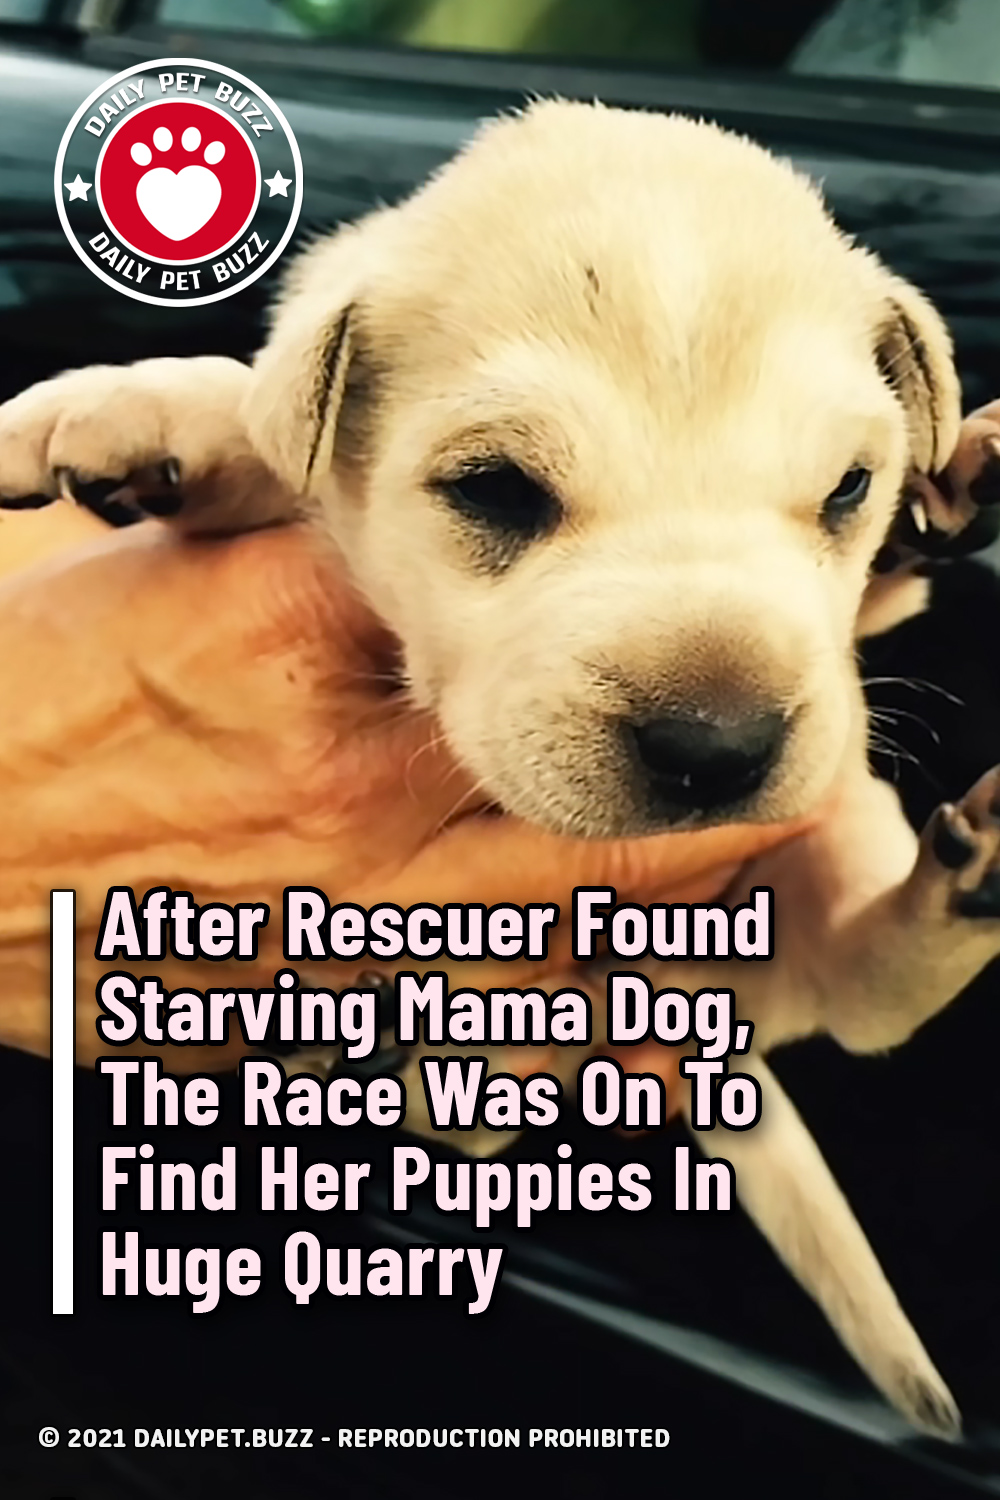 After Rescuer Found Starving Mama Dog, The Race Was On To Find Her Puppies In Huge Quarry